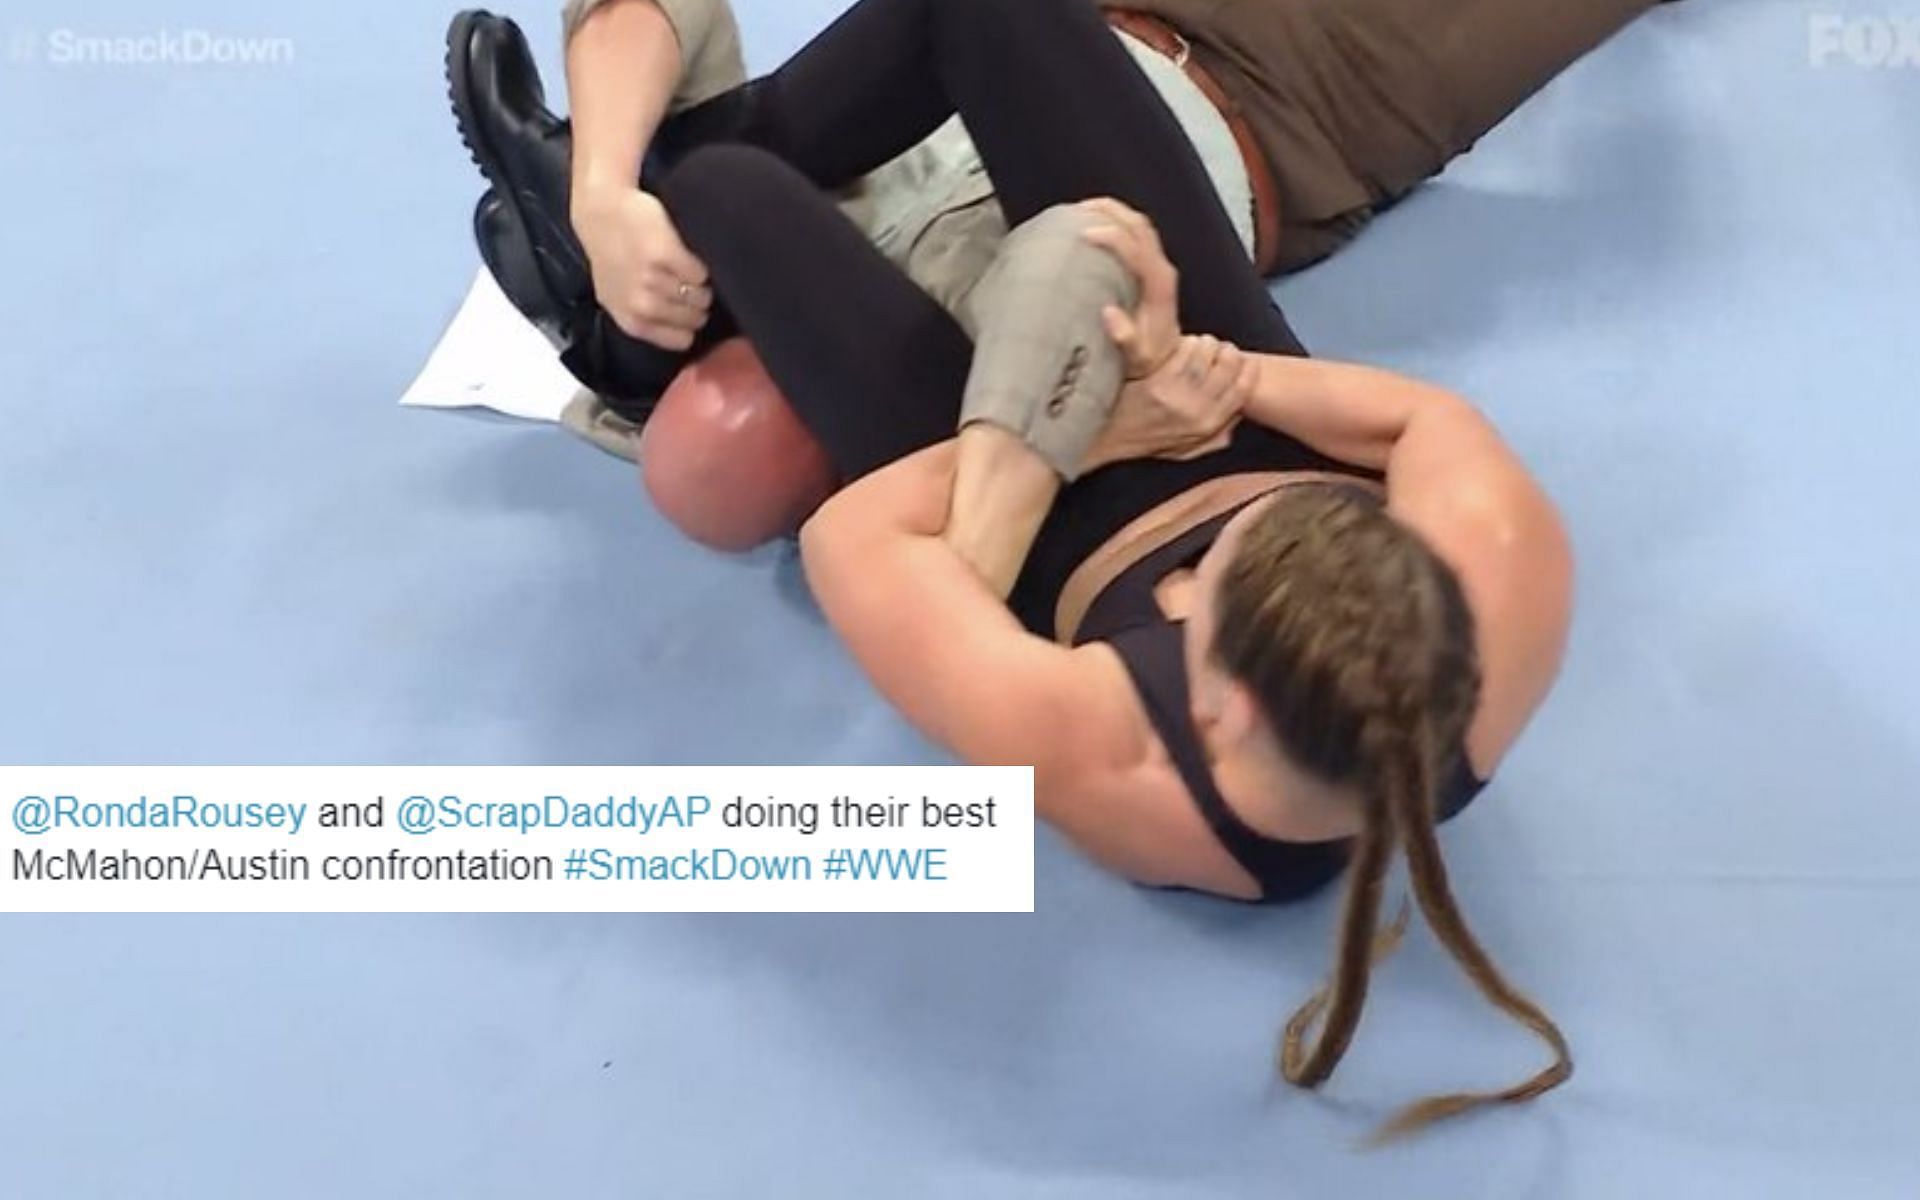 "Now no one will respect him" - Twitter explodes as Ronda ...